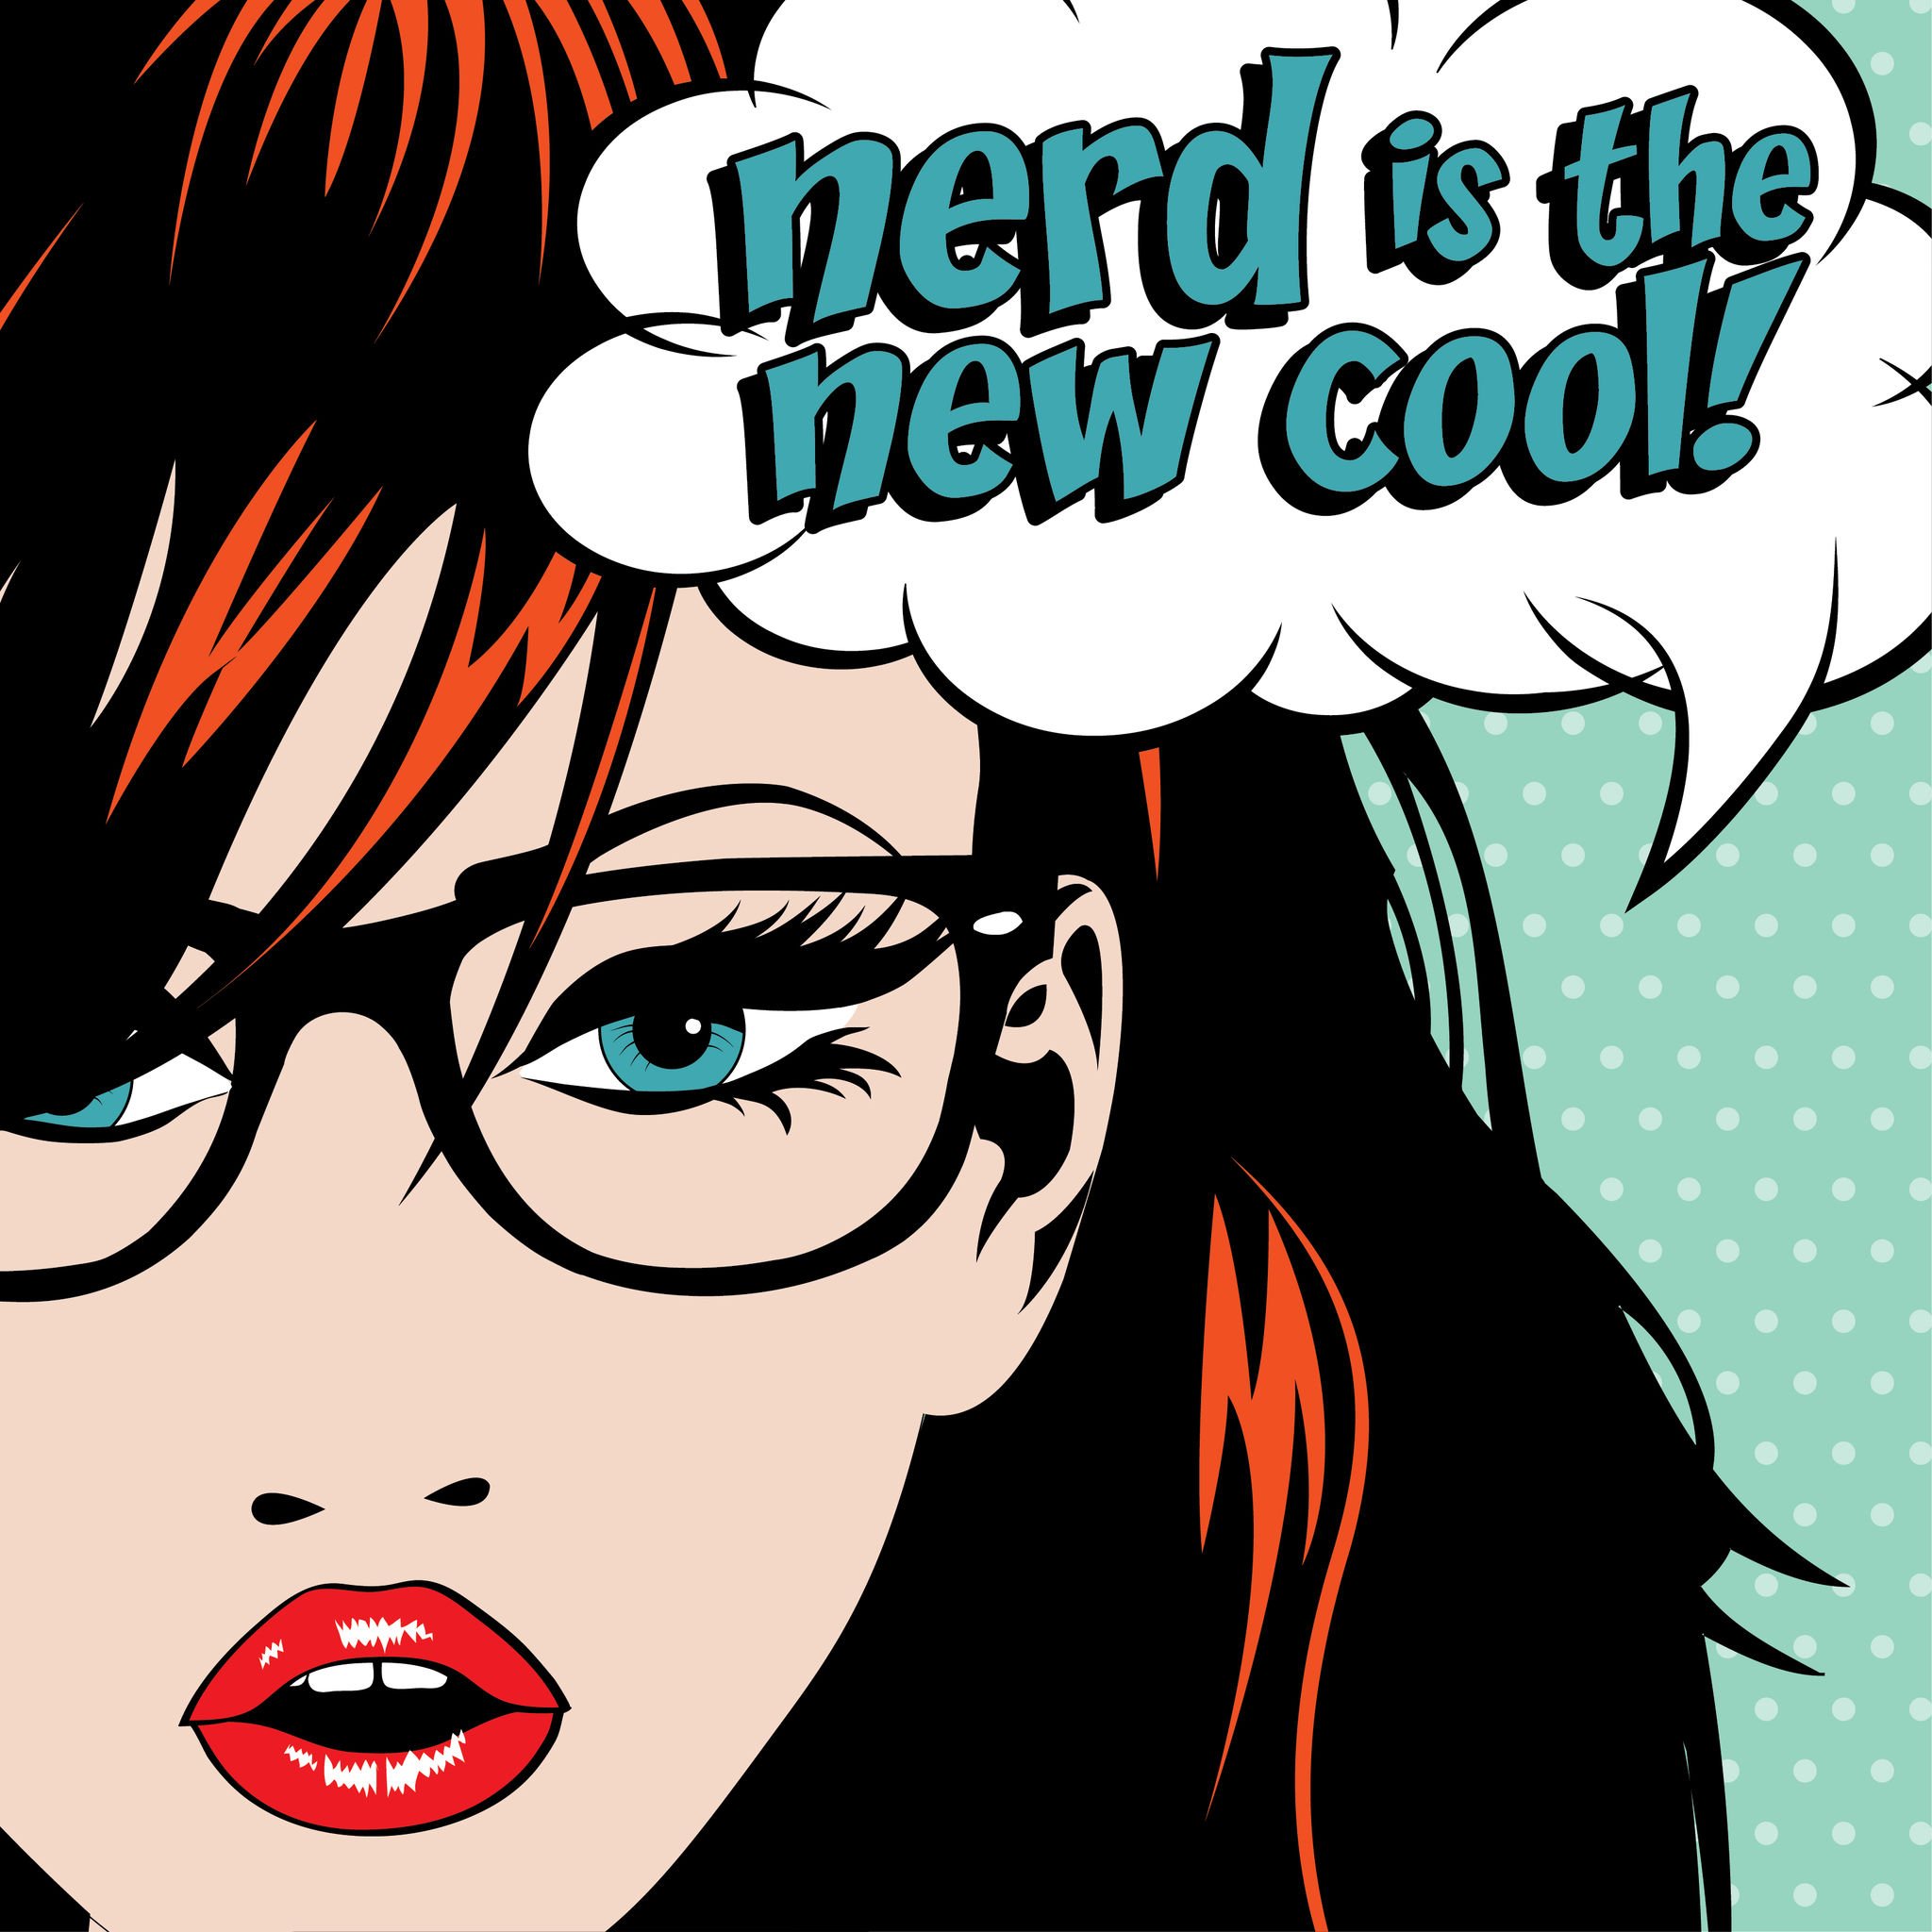 'Nerd is the new cool' - Especial Dia do Orgulho Geek